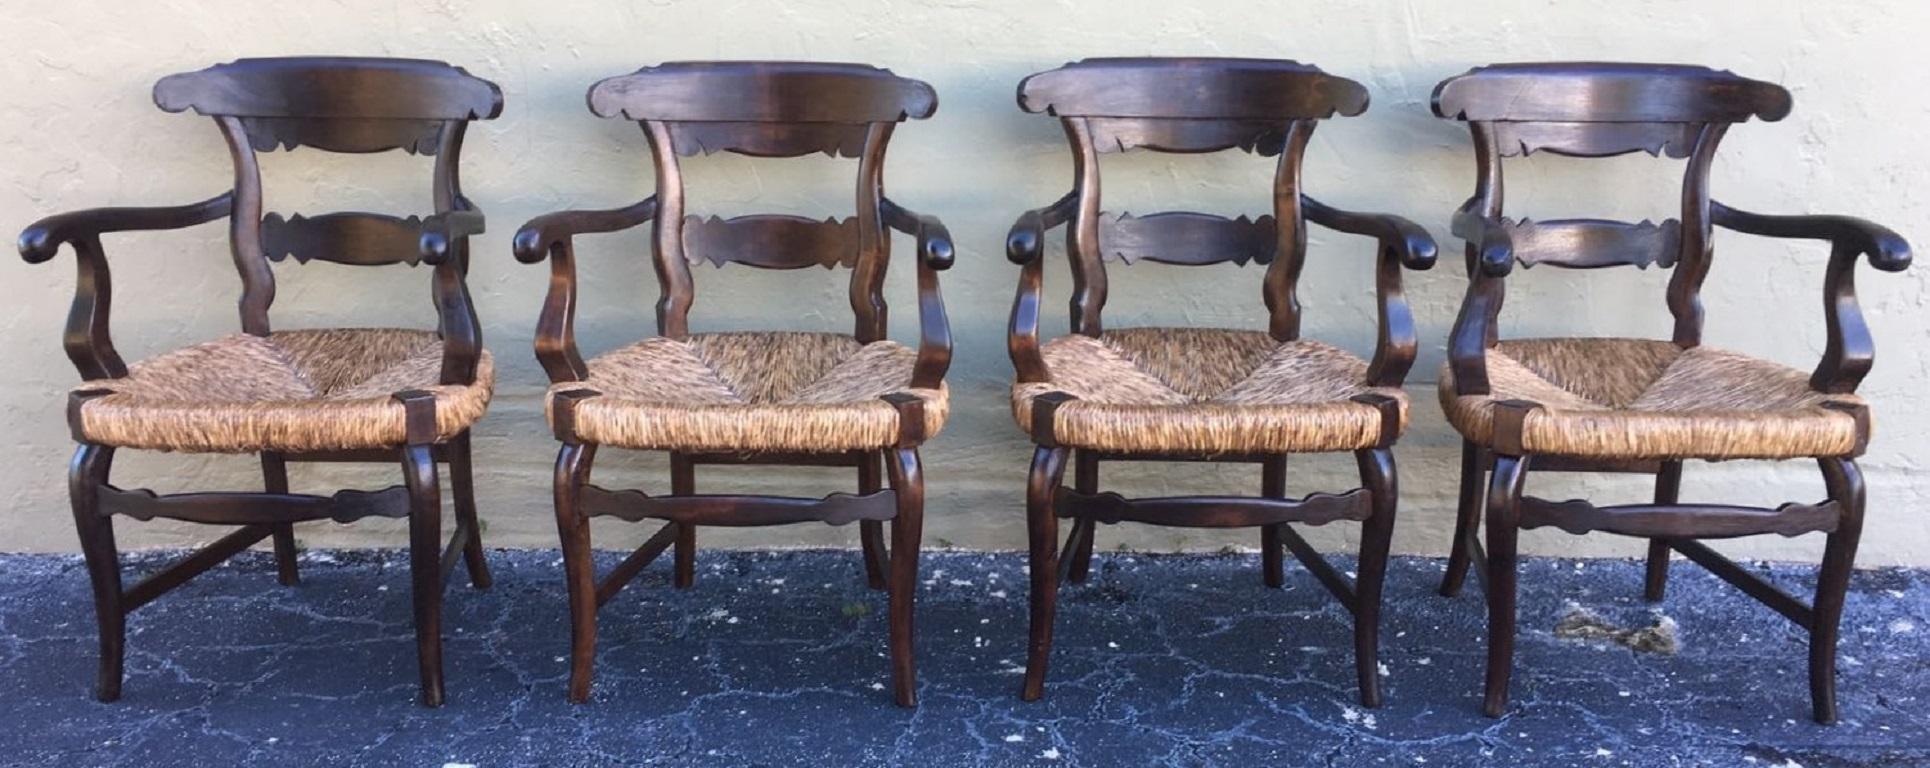 19th century set of four armchairs with straw seat very comfortable.
Dining Armchairs
